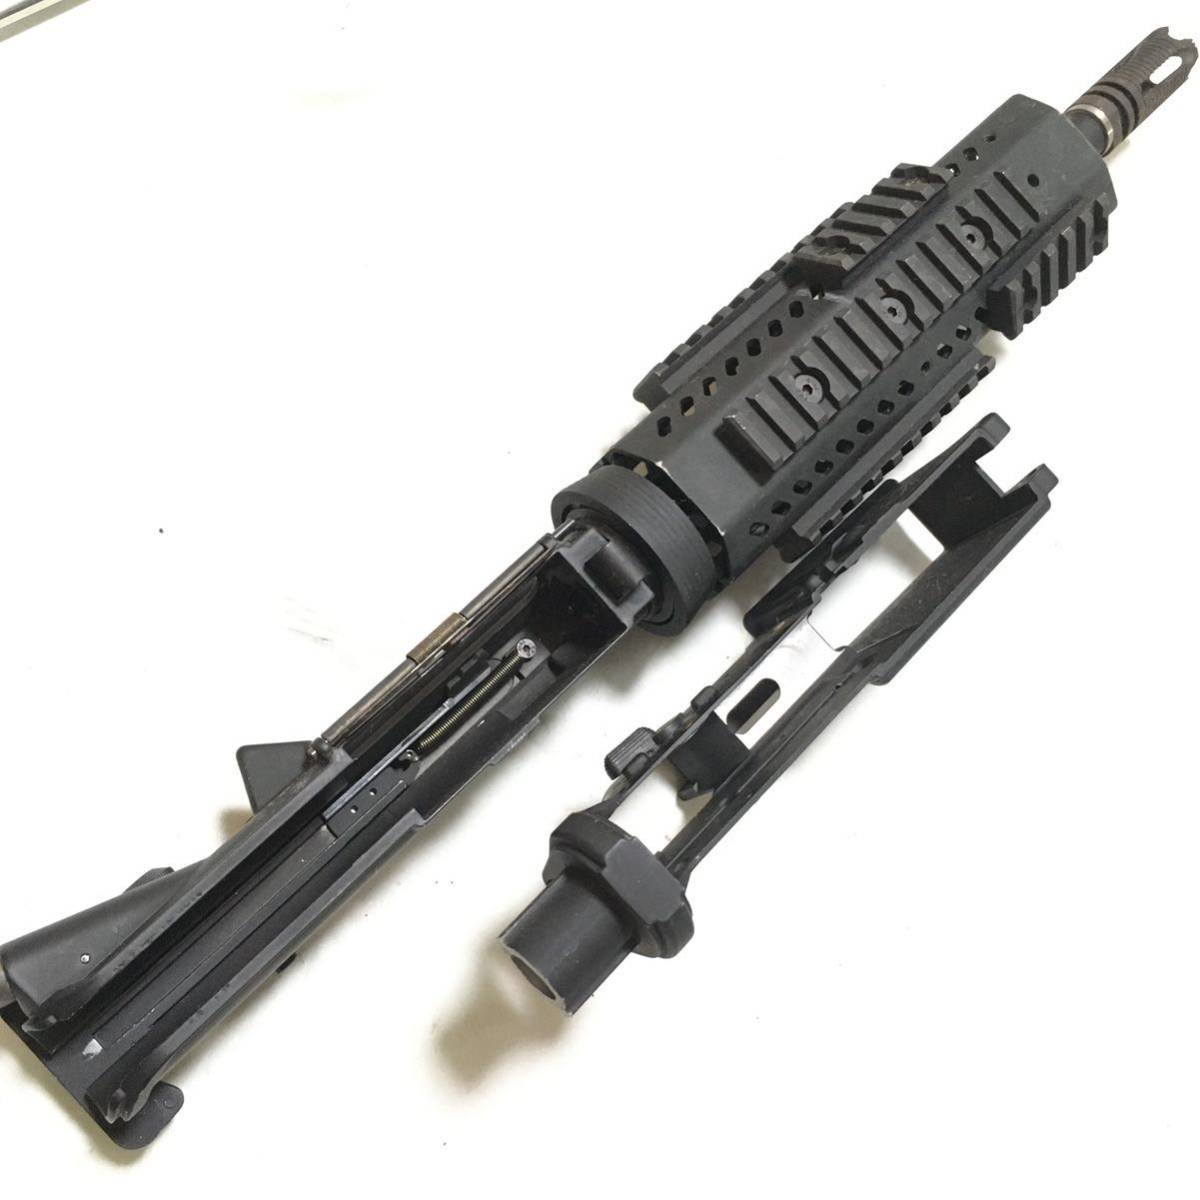  Manufacturers unknown M4 S system hand guard upper frame & lower frame full metal Nights stamp inner barrel chamber 